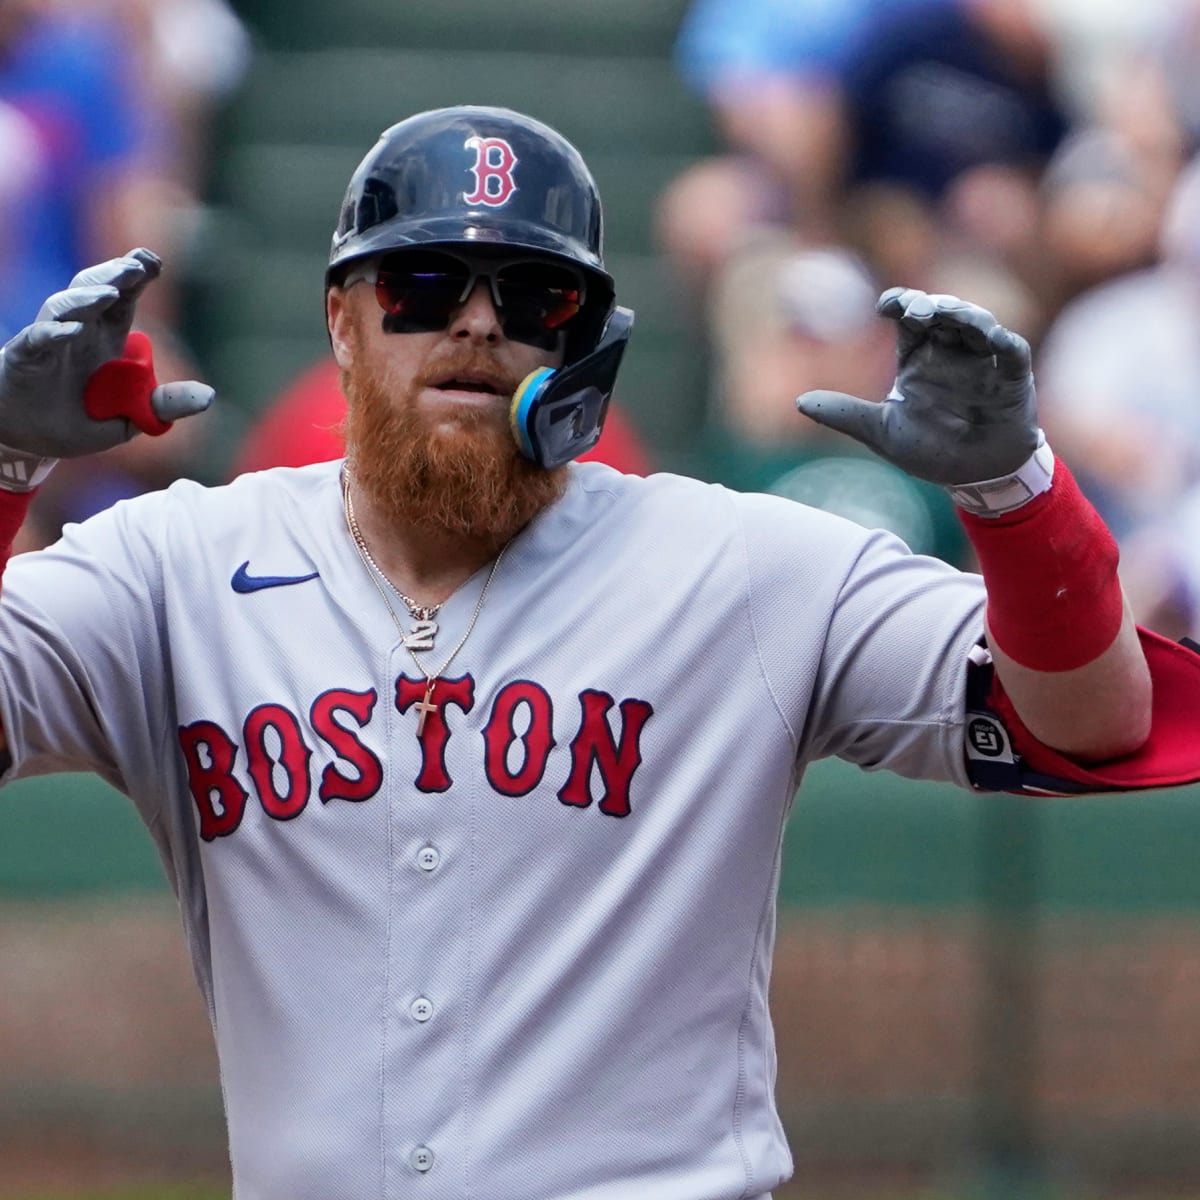 This is a 2023 photo of third baseman Justin Turner of the Red Sox